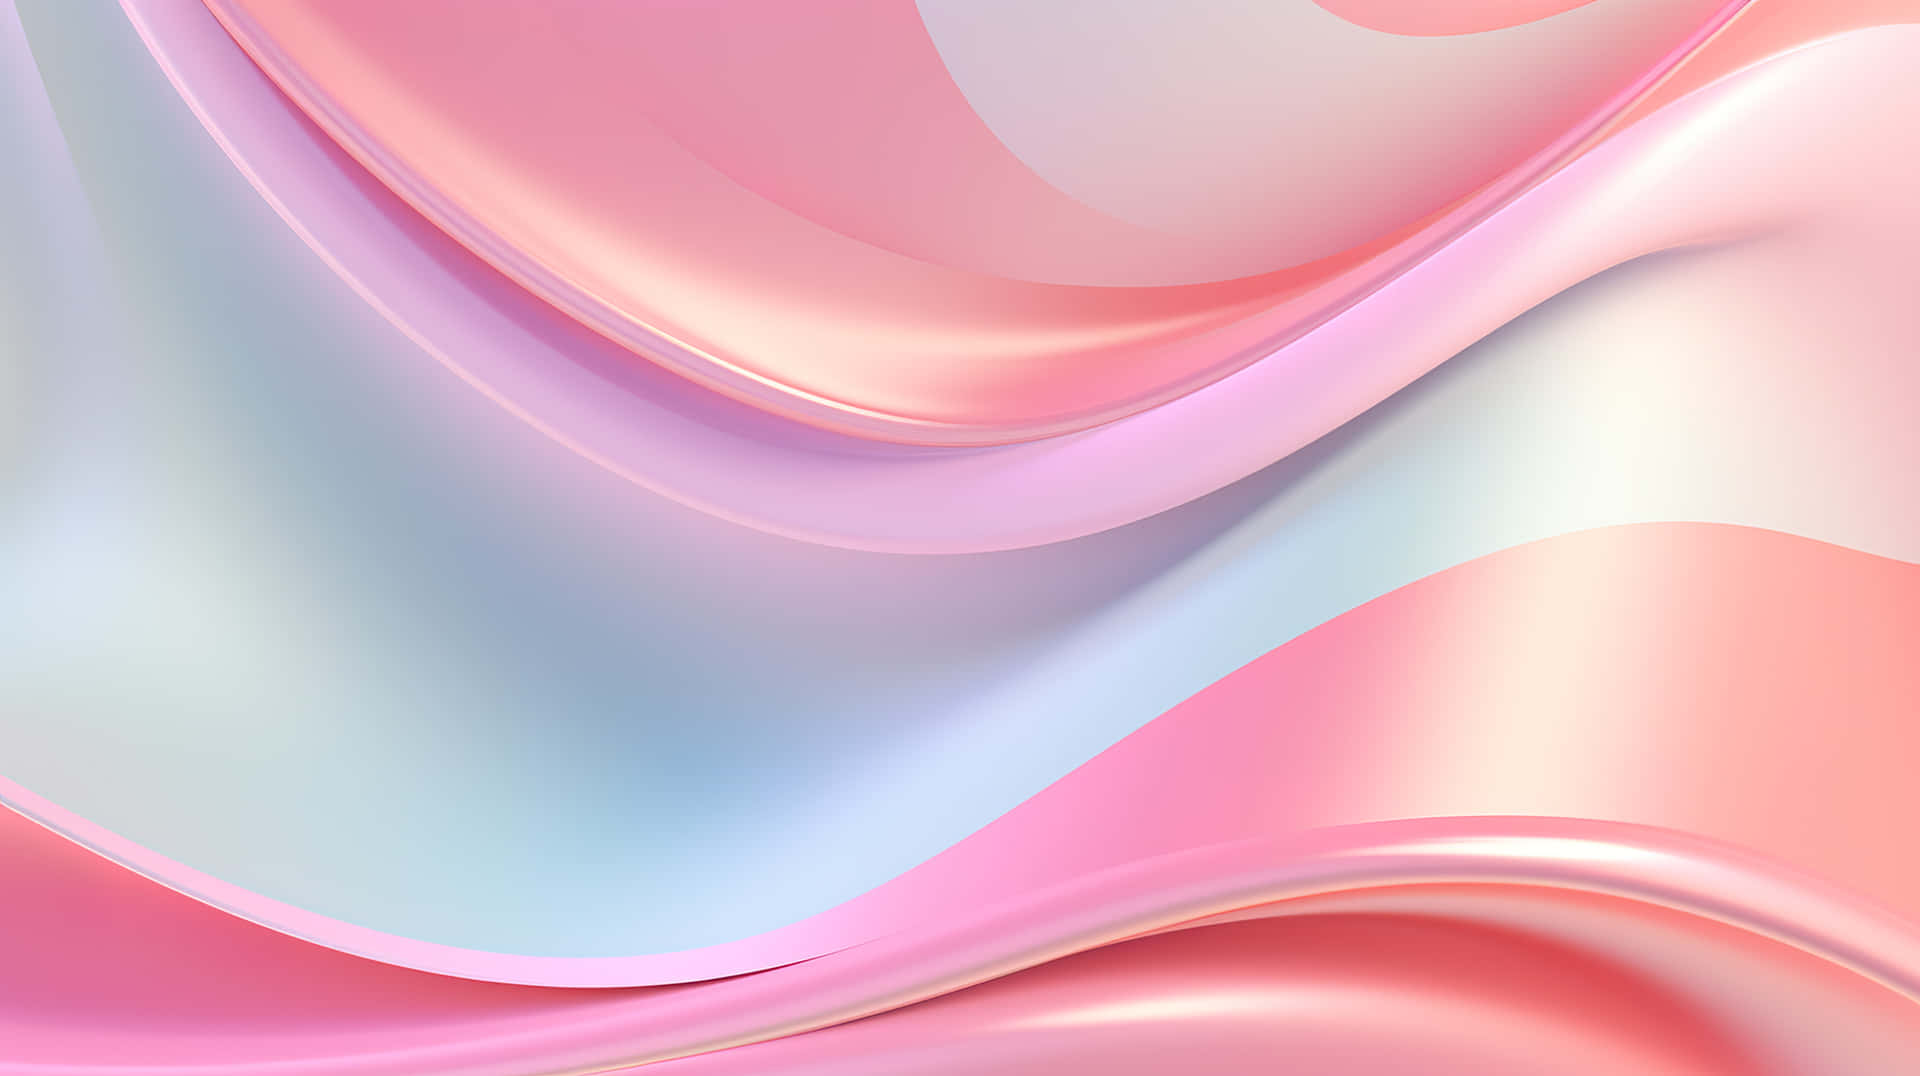 Abstract Pinkand Blue Waves Background Wallpaper